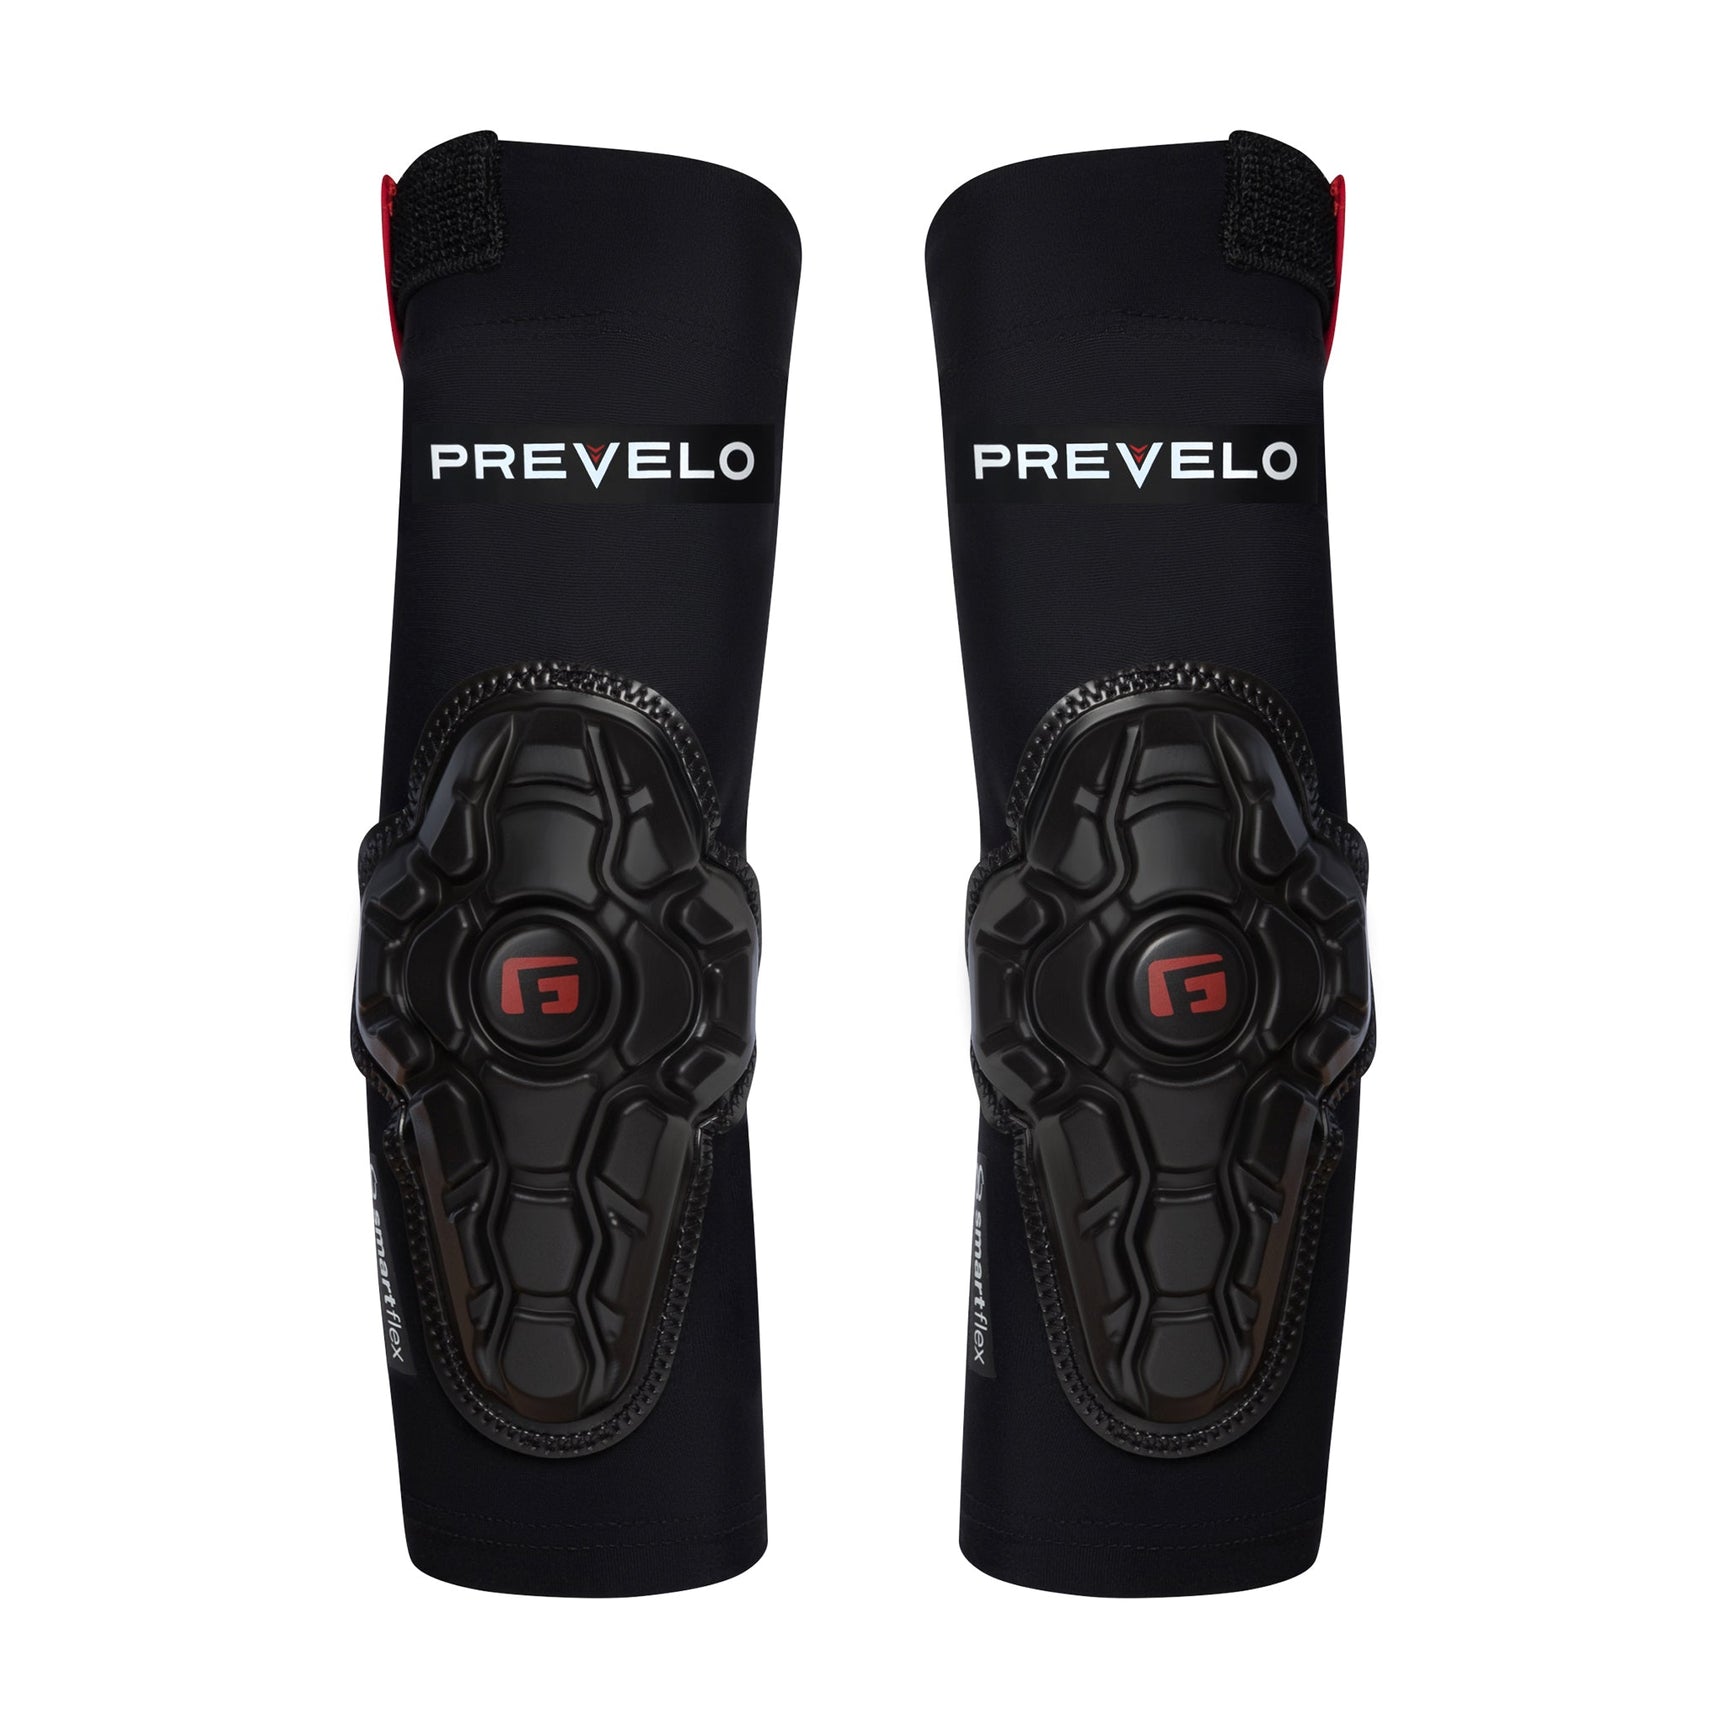 Prevelo Bikes-Prevelo Elbow Pads by G-Form-